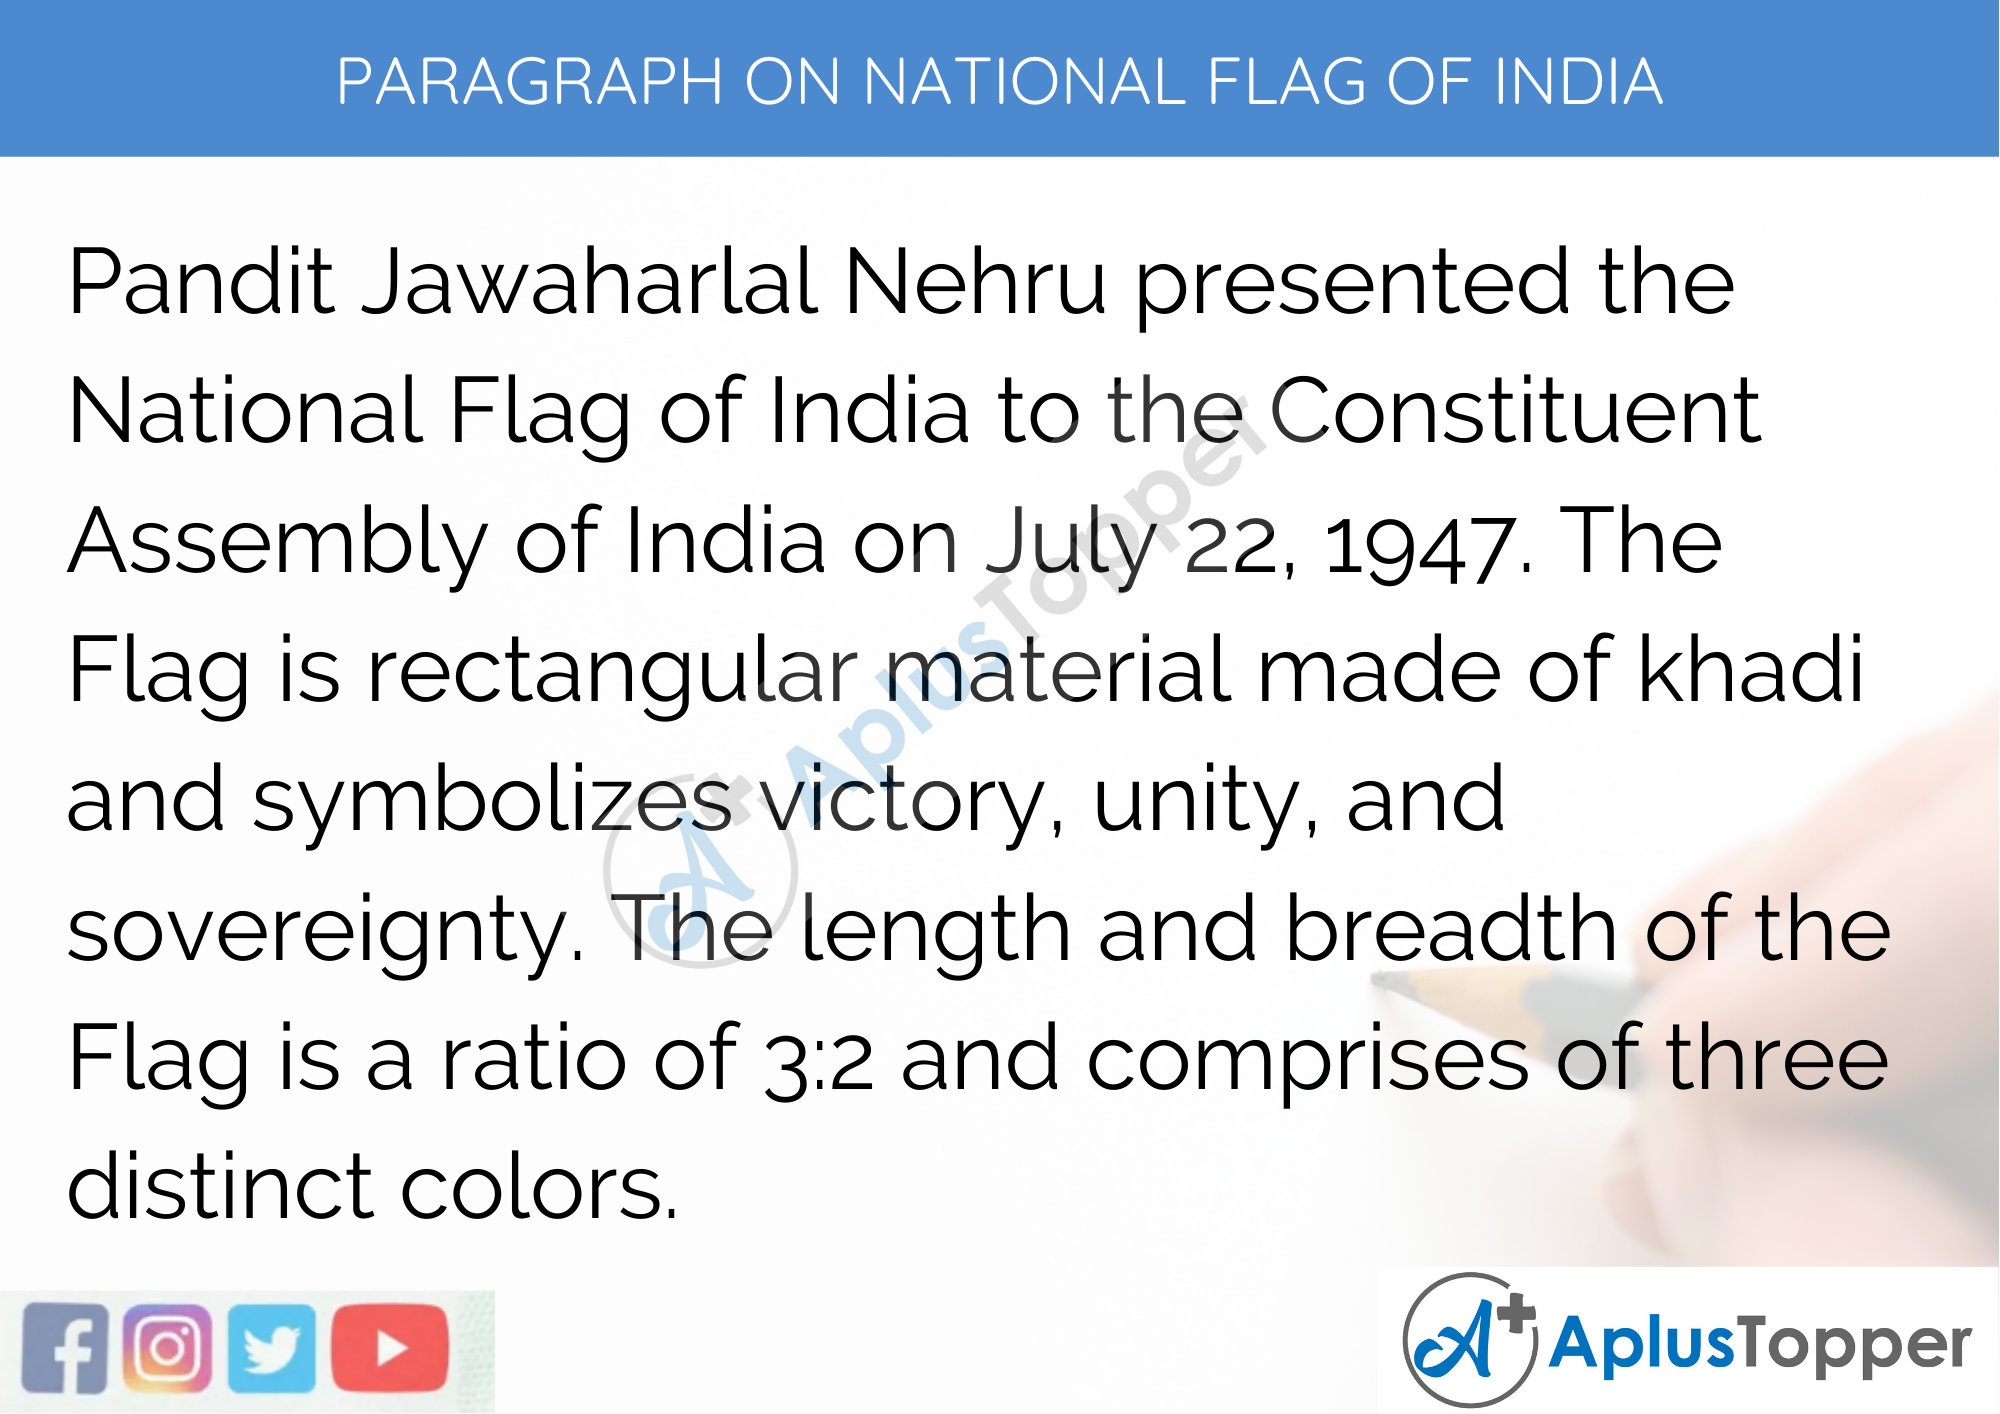 Paragraph on National Flag of India - 250 to 300 Words for Classes 9, 10, 11, and 12, And Competitive Exam Students